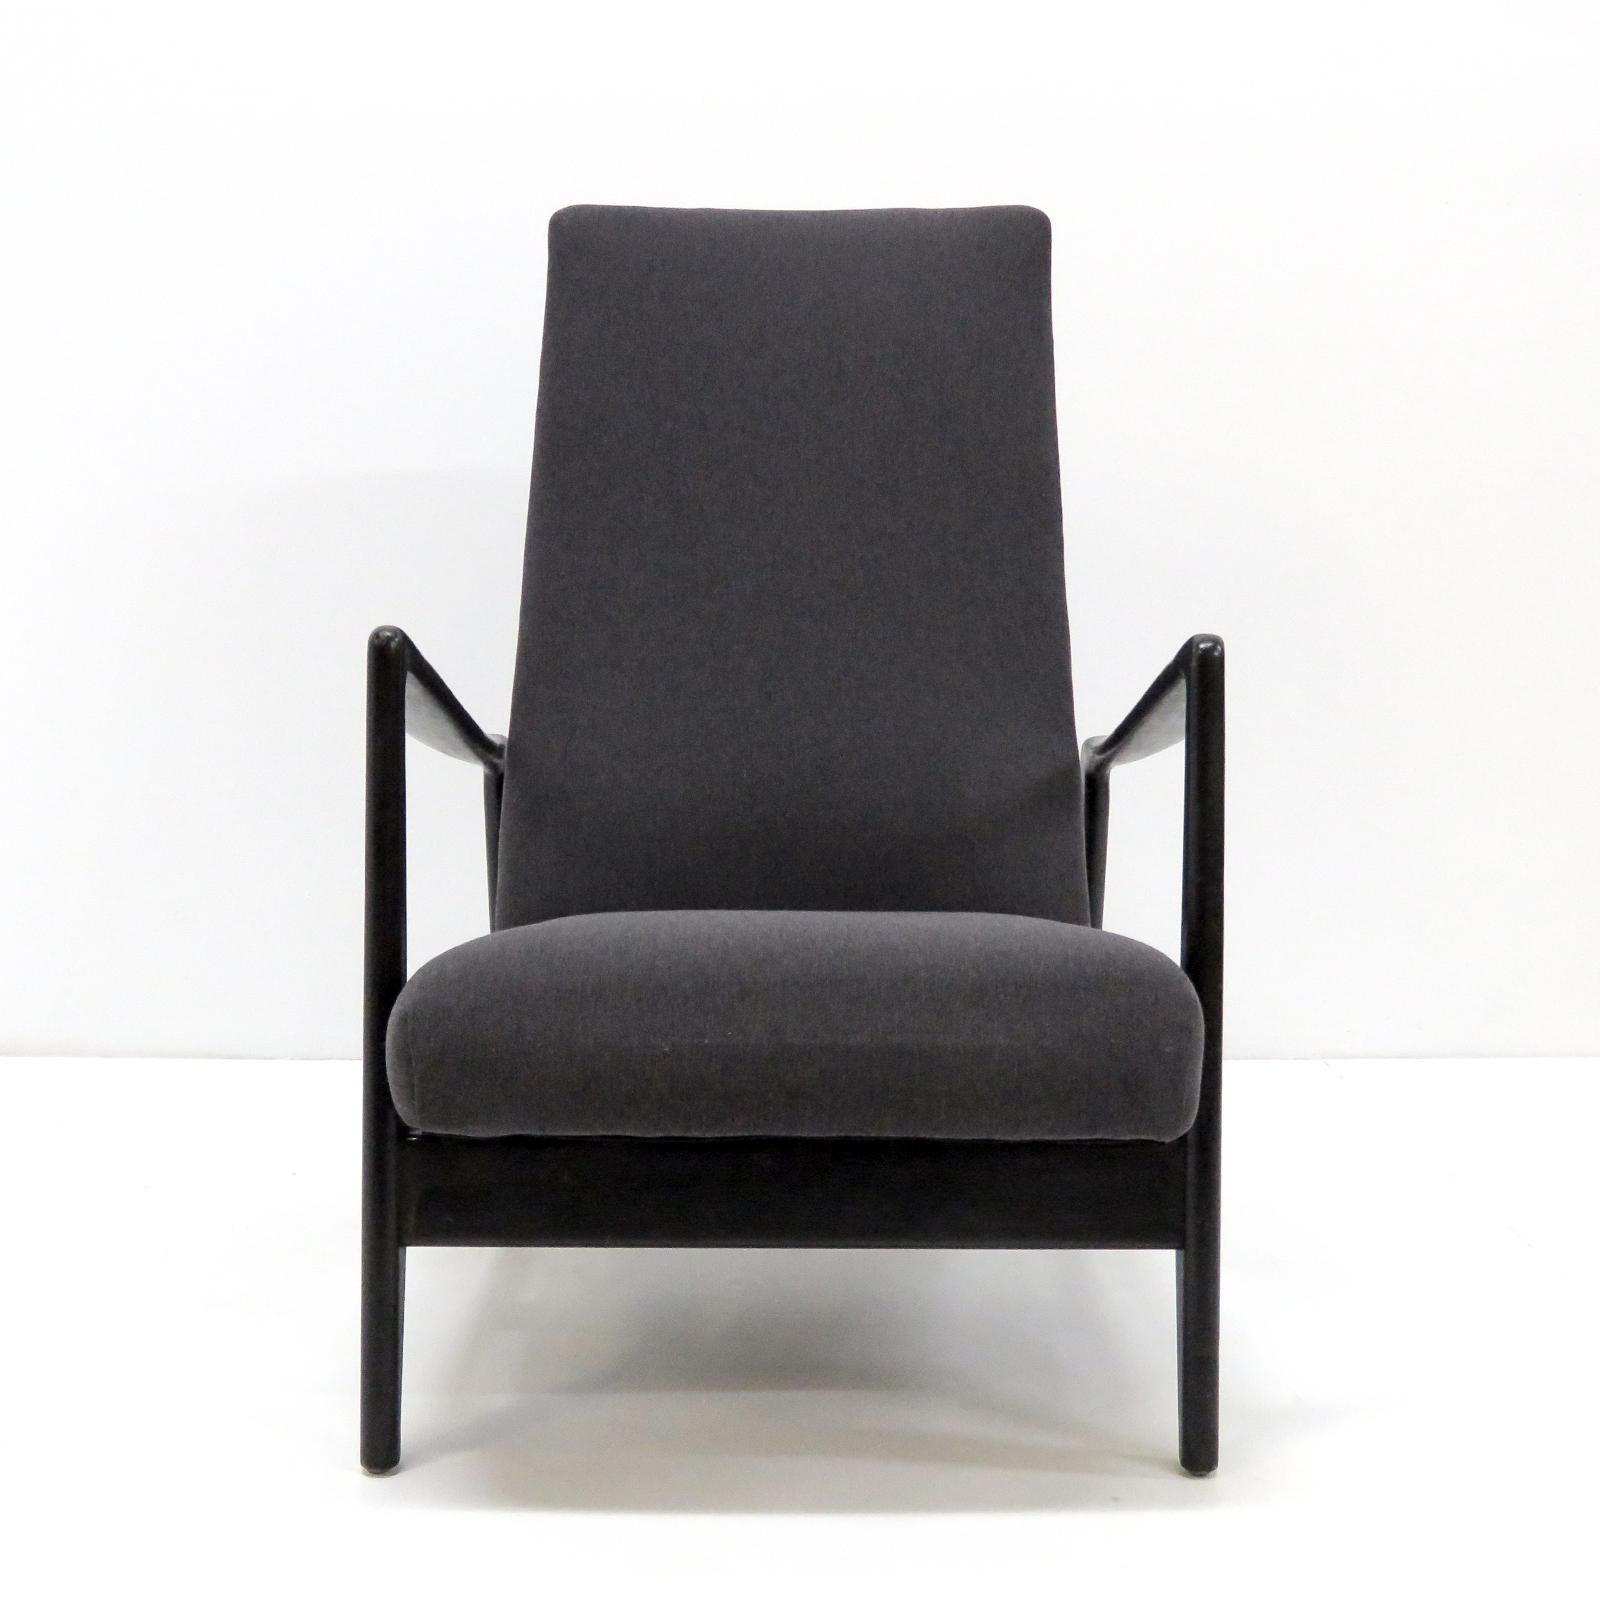 Wonderful adjustable lounge chair designed bu Gio Ponti for the Hotel Parco dei Principi in Sorrento. Organic black lacquered wooden frame, previously recovered in a grey fabric with a hint of violet. Lever adjustments in 8 possible positions.